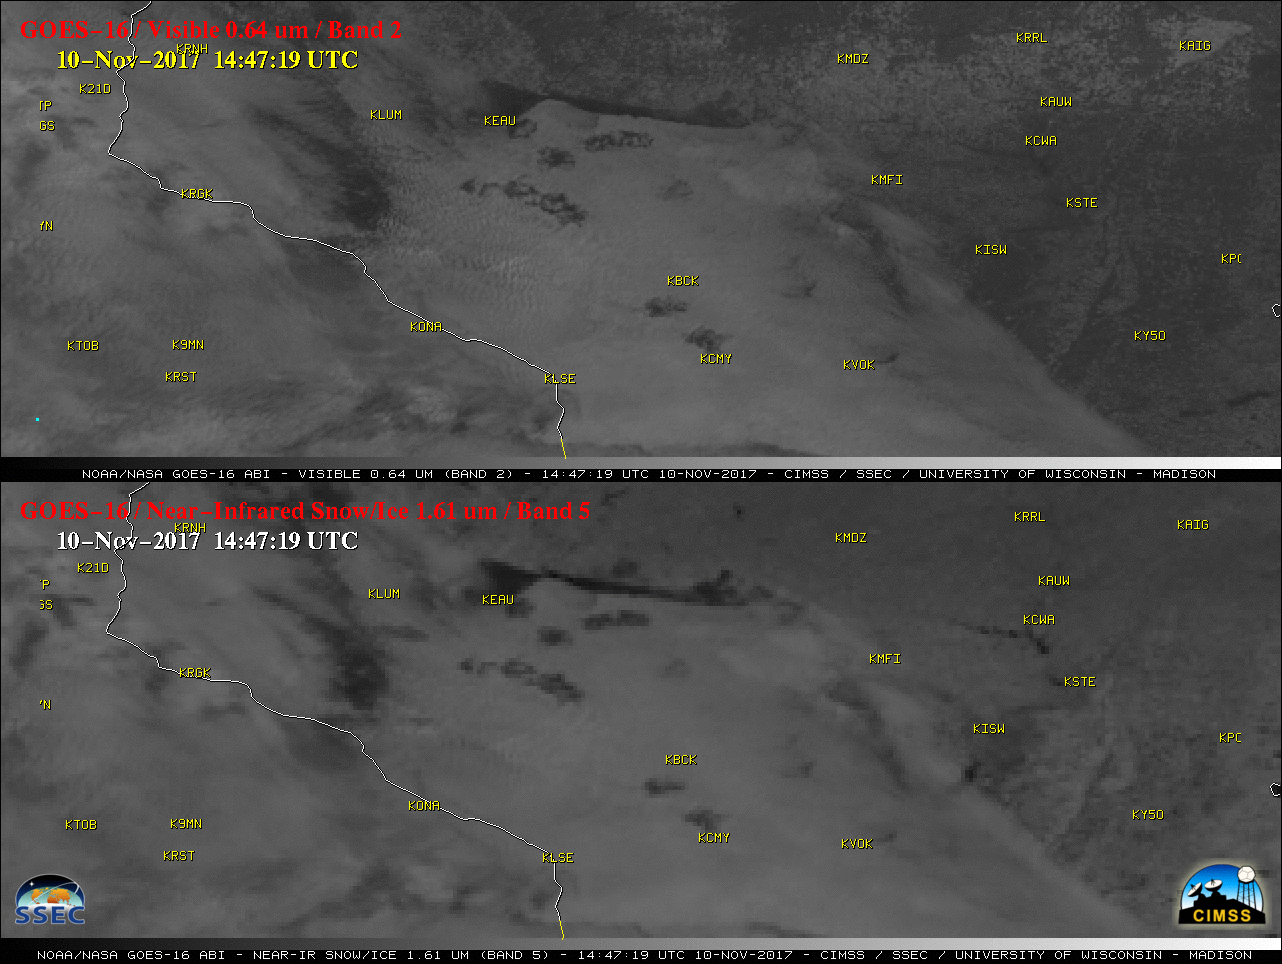 GOES-16 Visible (0.64 µm, top) and Near-Infrared 